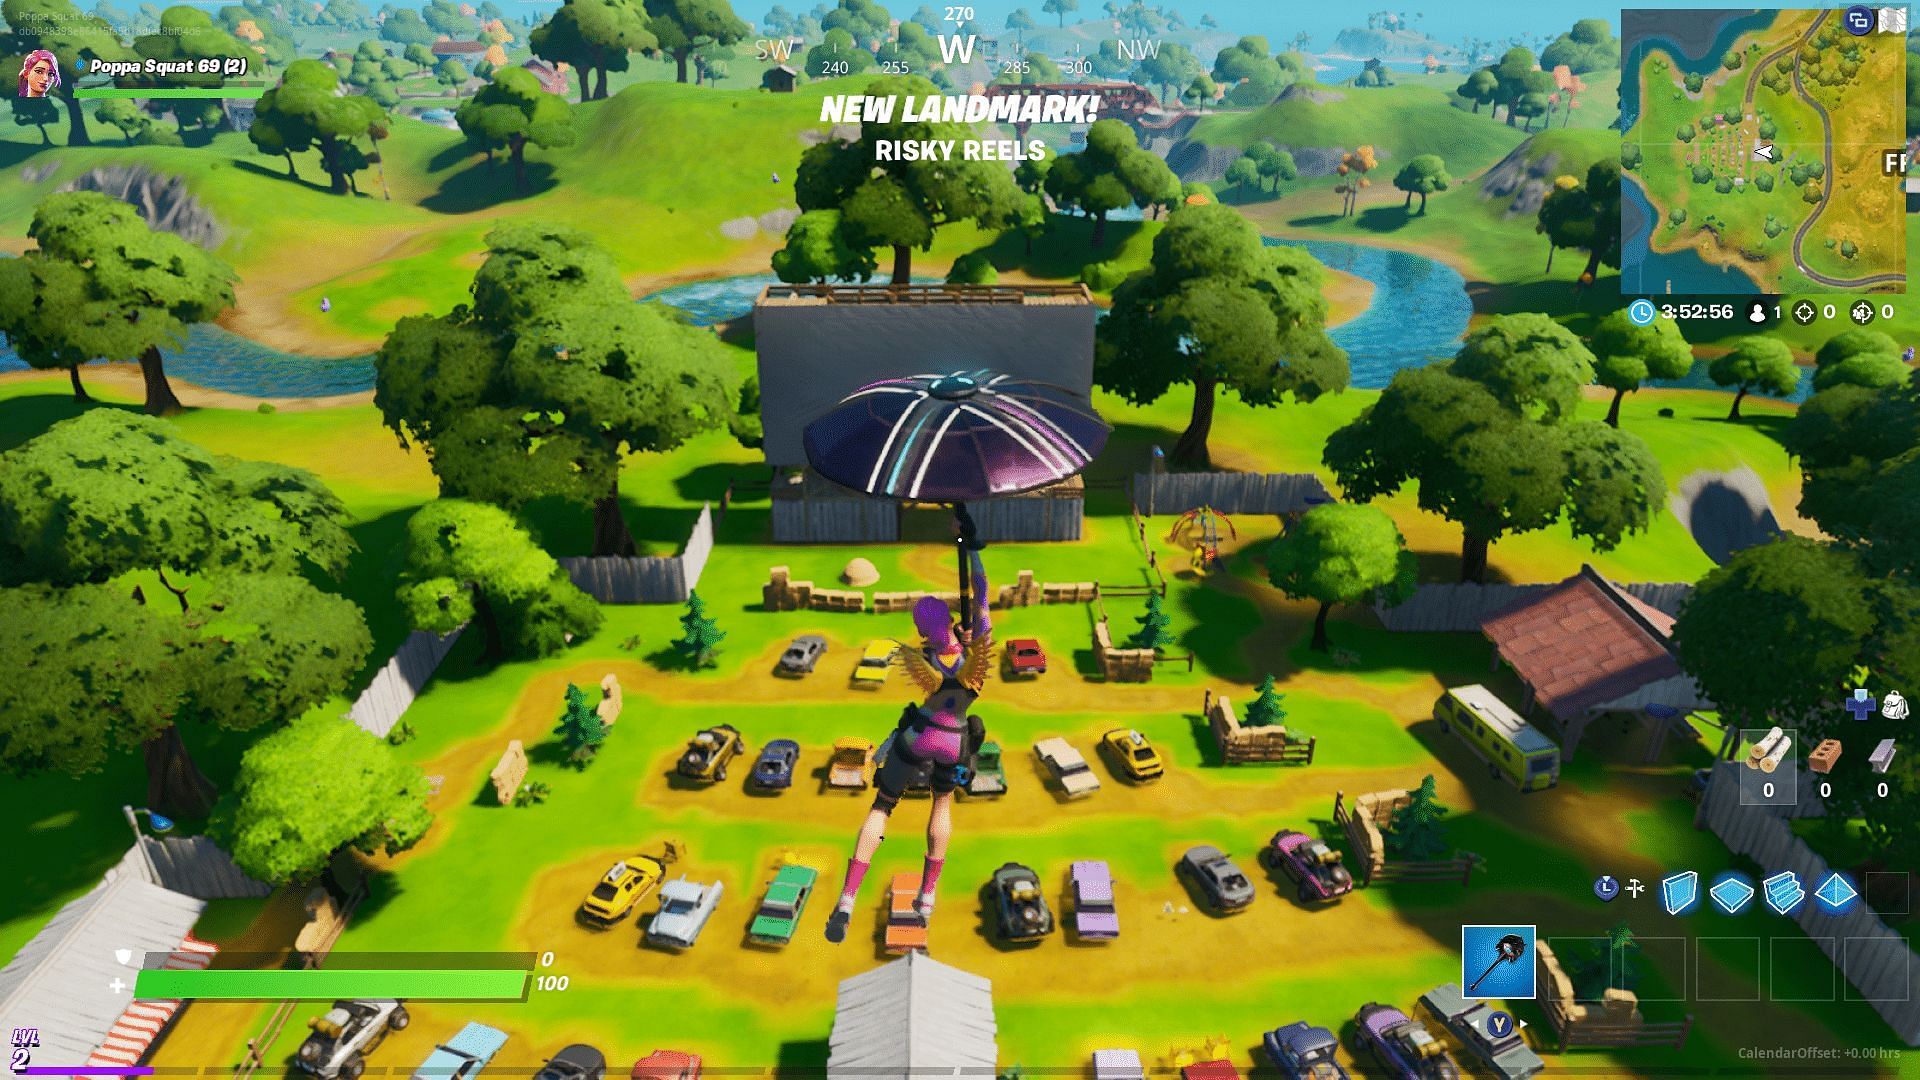 Risky Reels has plenty of cars for this Fire Yoga challenge. (Image via Epic Games)